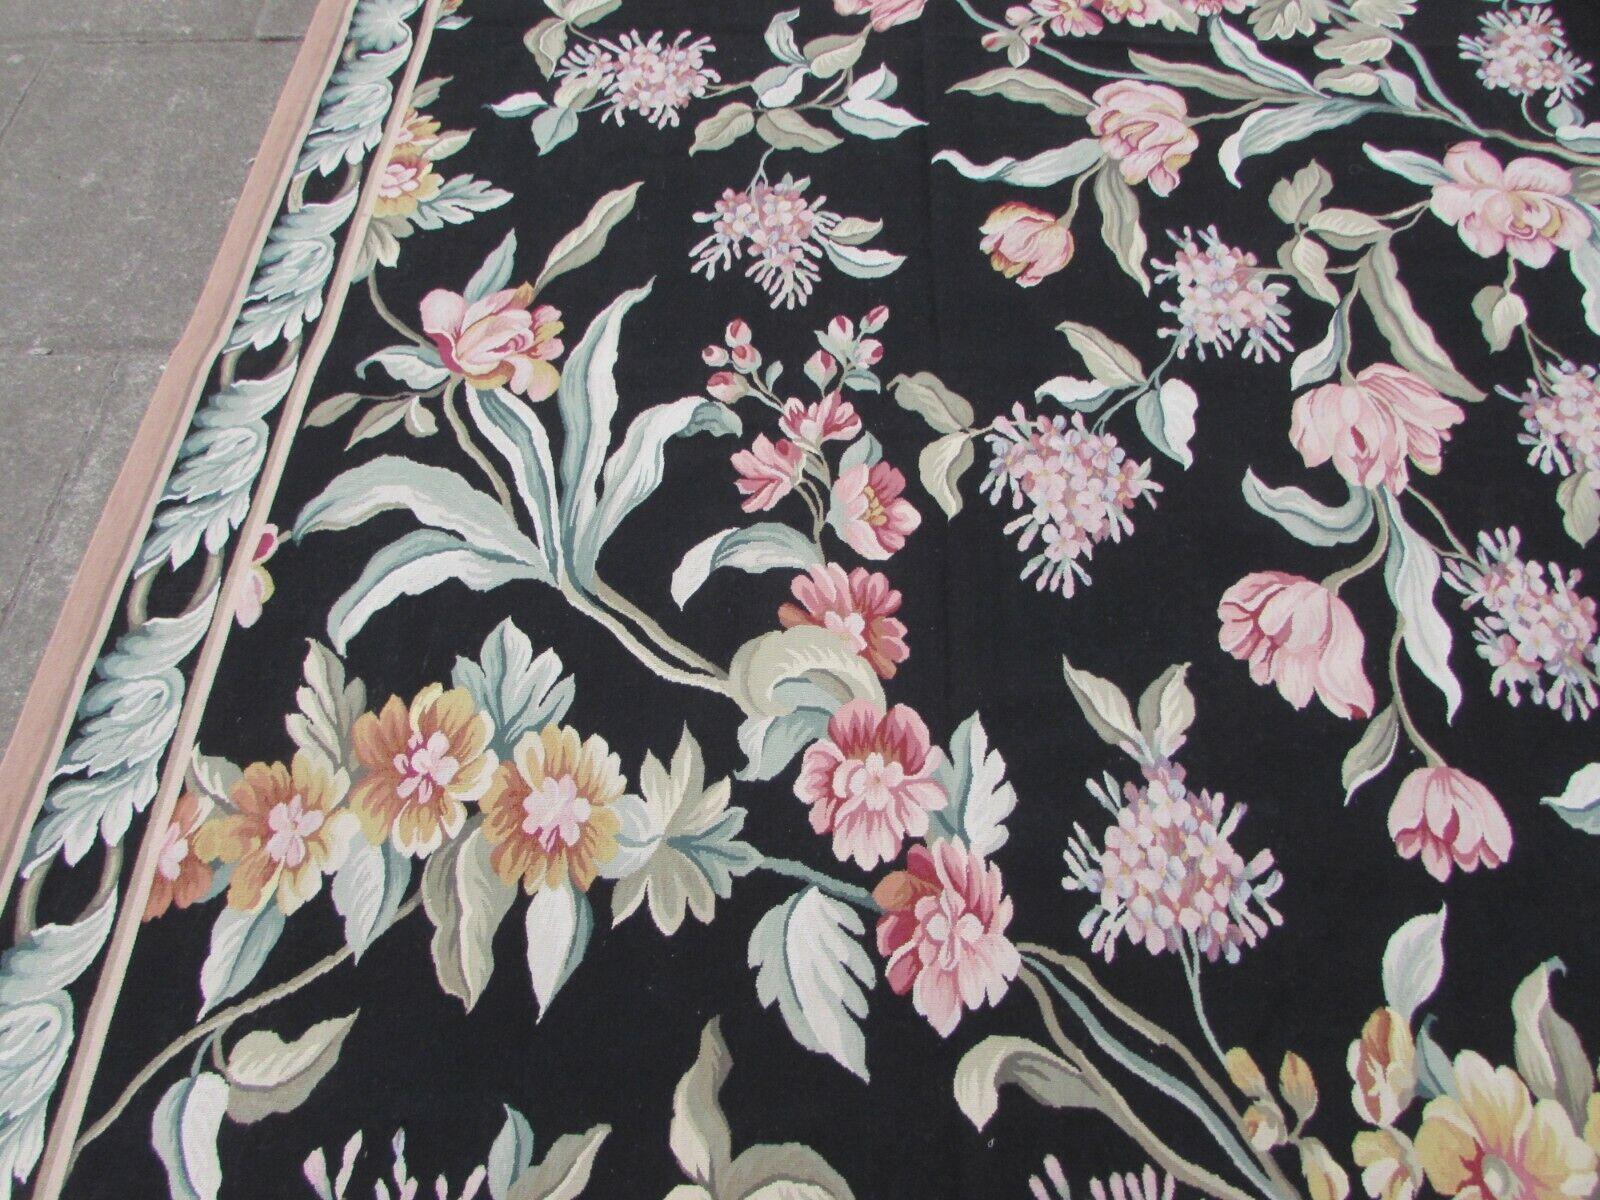 Handmade Vintage French Aubusson Rug 8.8' x 12.2', 1970s, 1Q51 For Sale 2